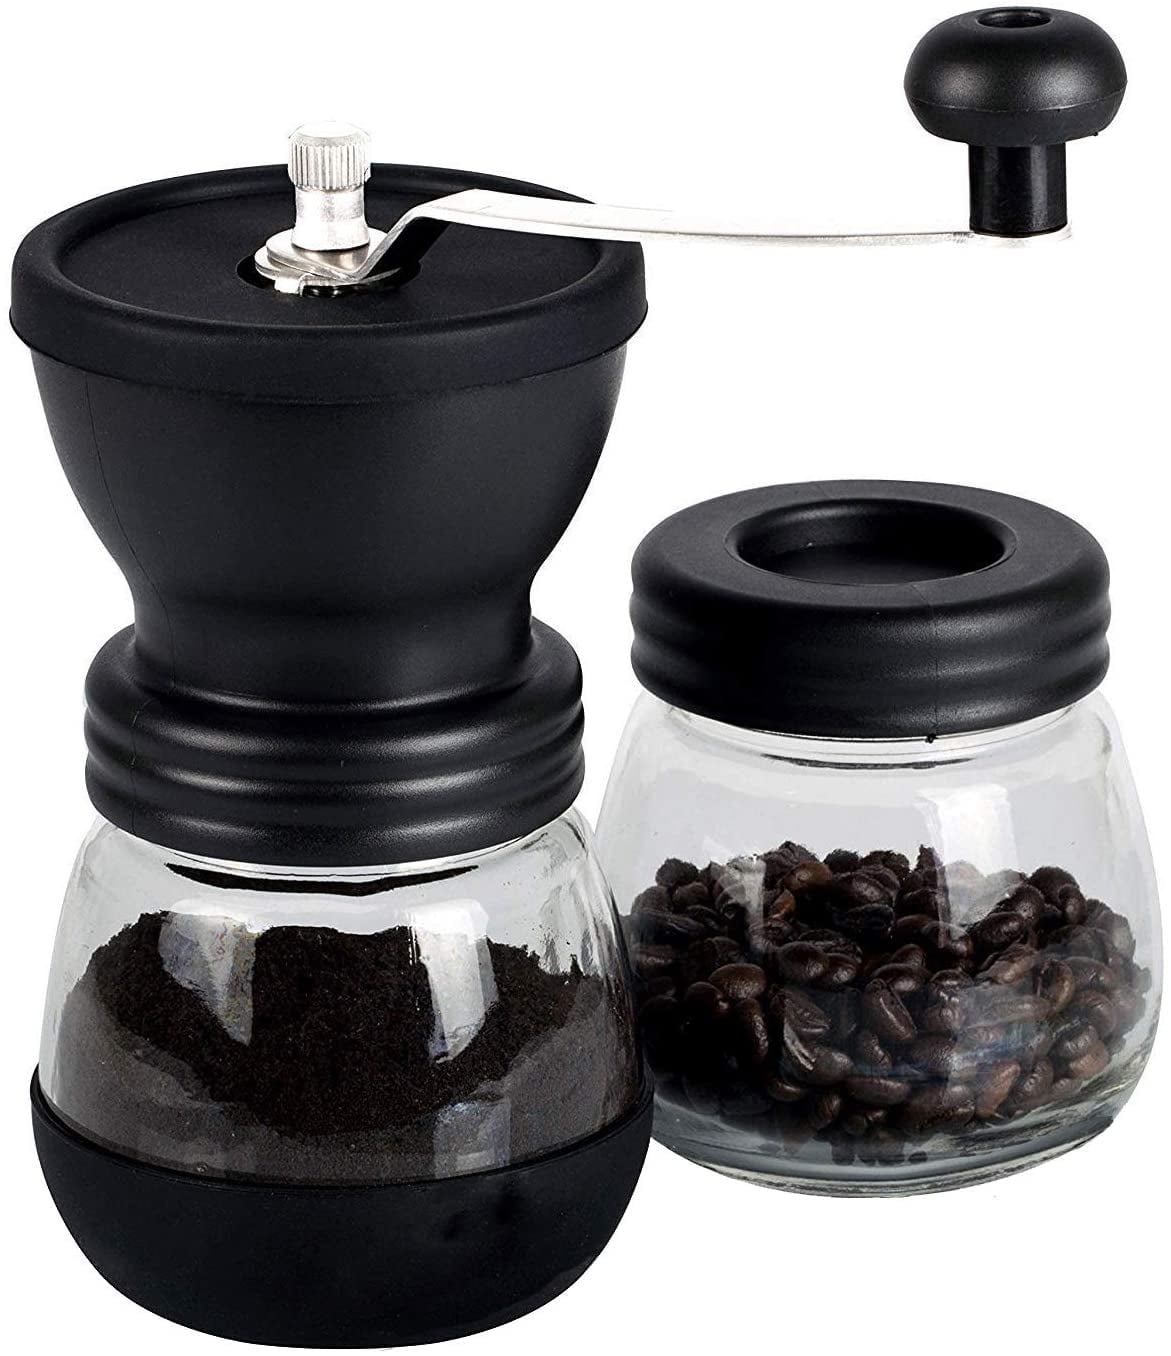 Manual Coffee Grinder Premium Stainless Steel Conical Ceramic Burr Whole Bean Ha 